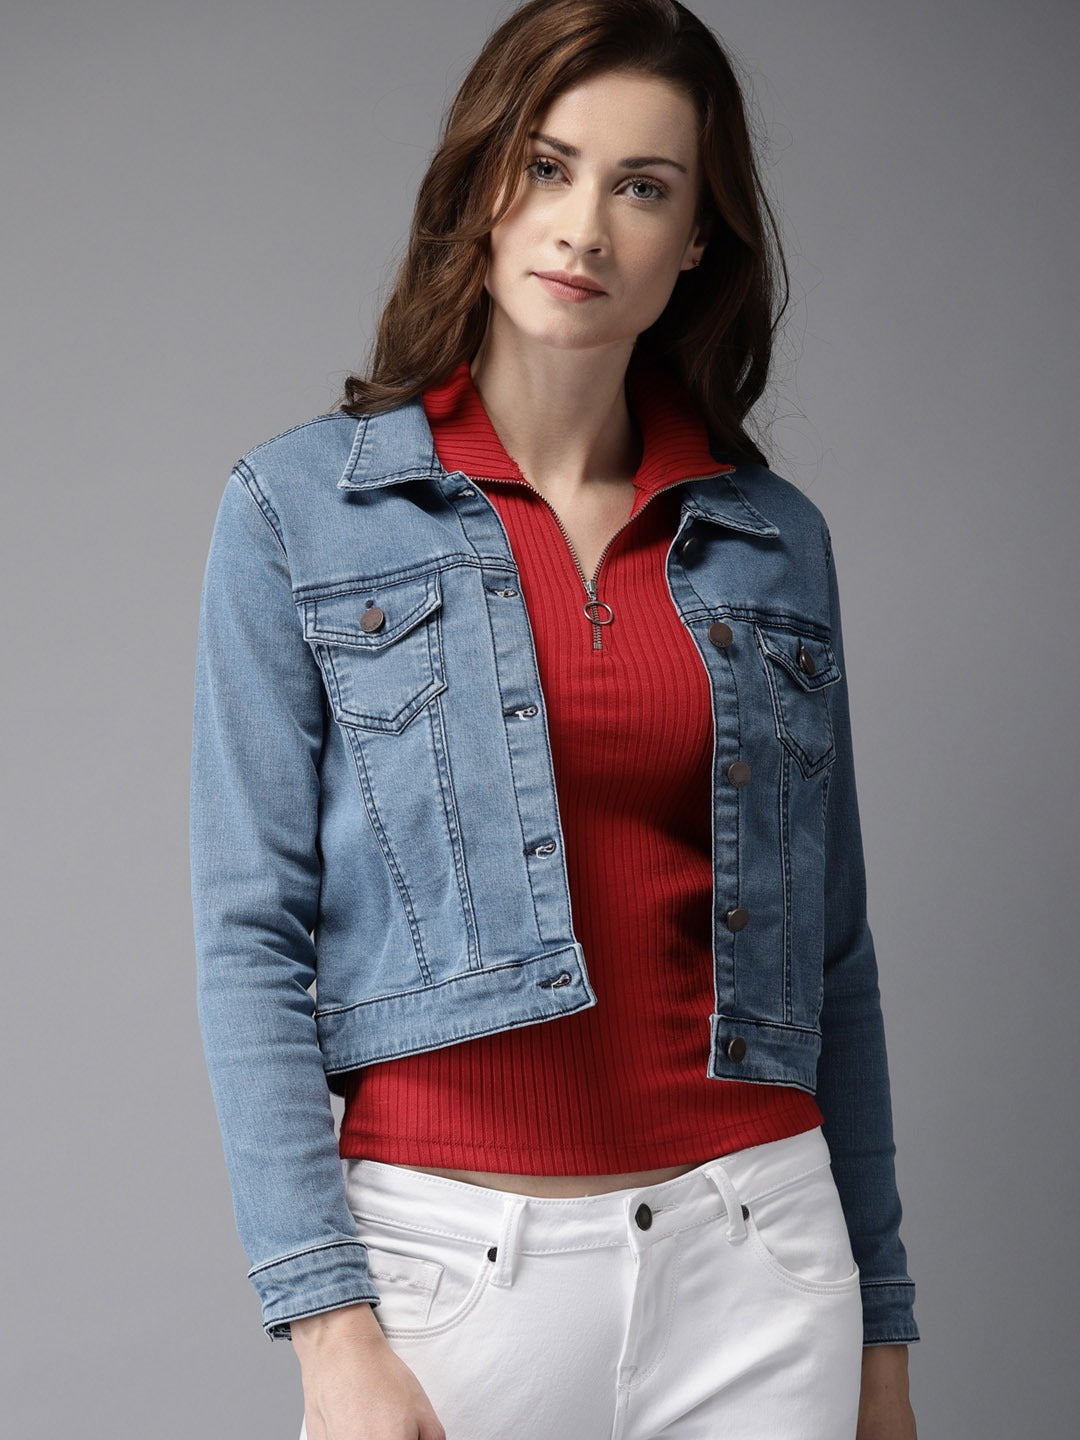 Blue denim jacket with red knit top, worn by young, brunette woman against gray background